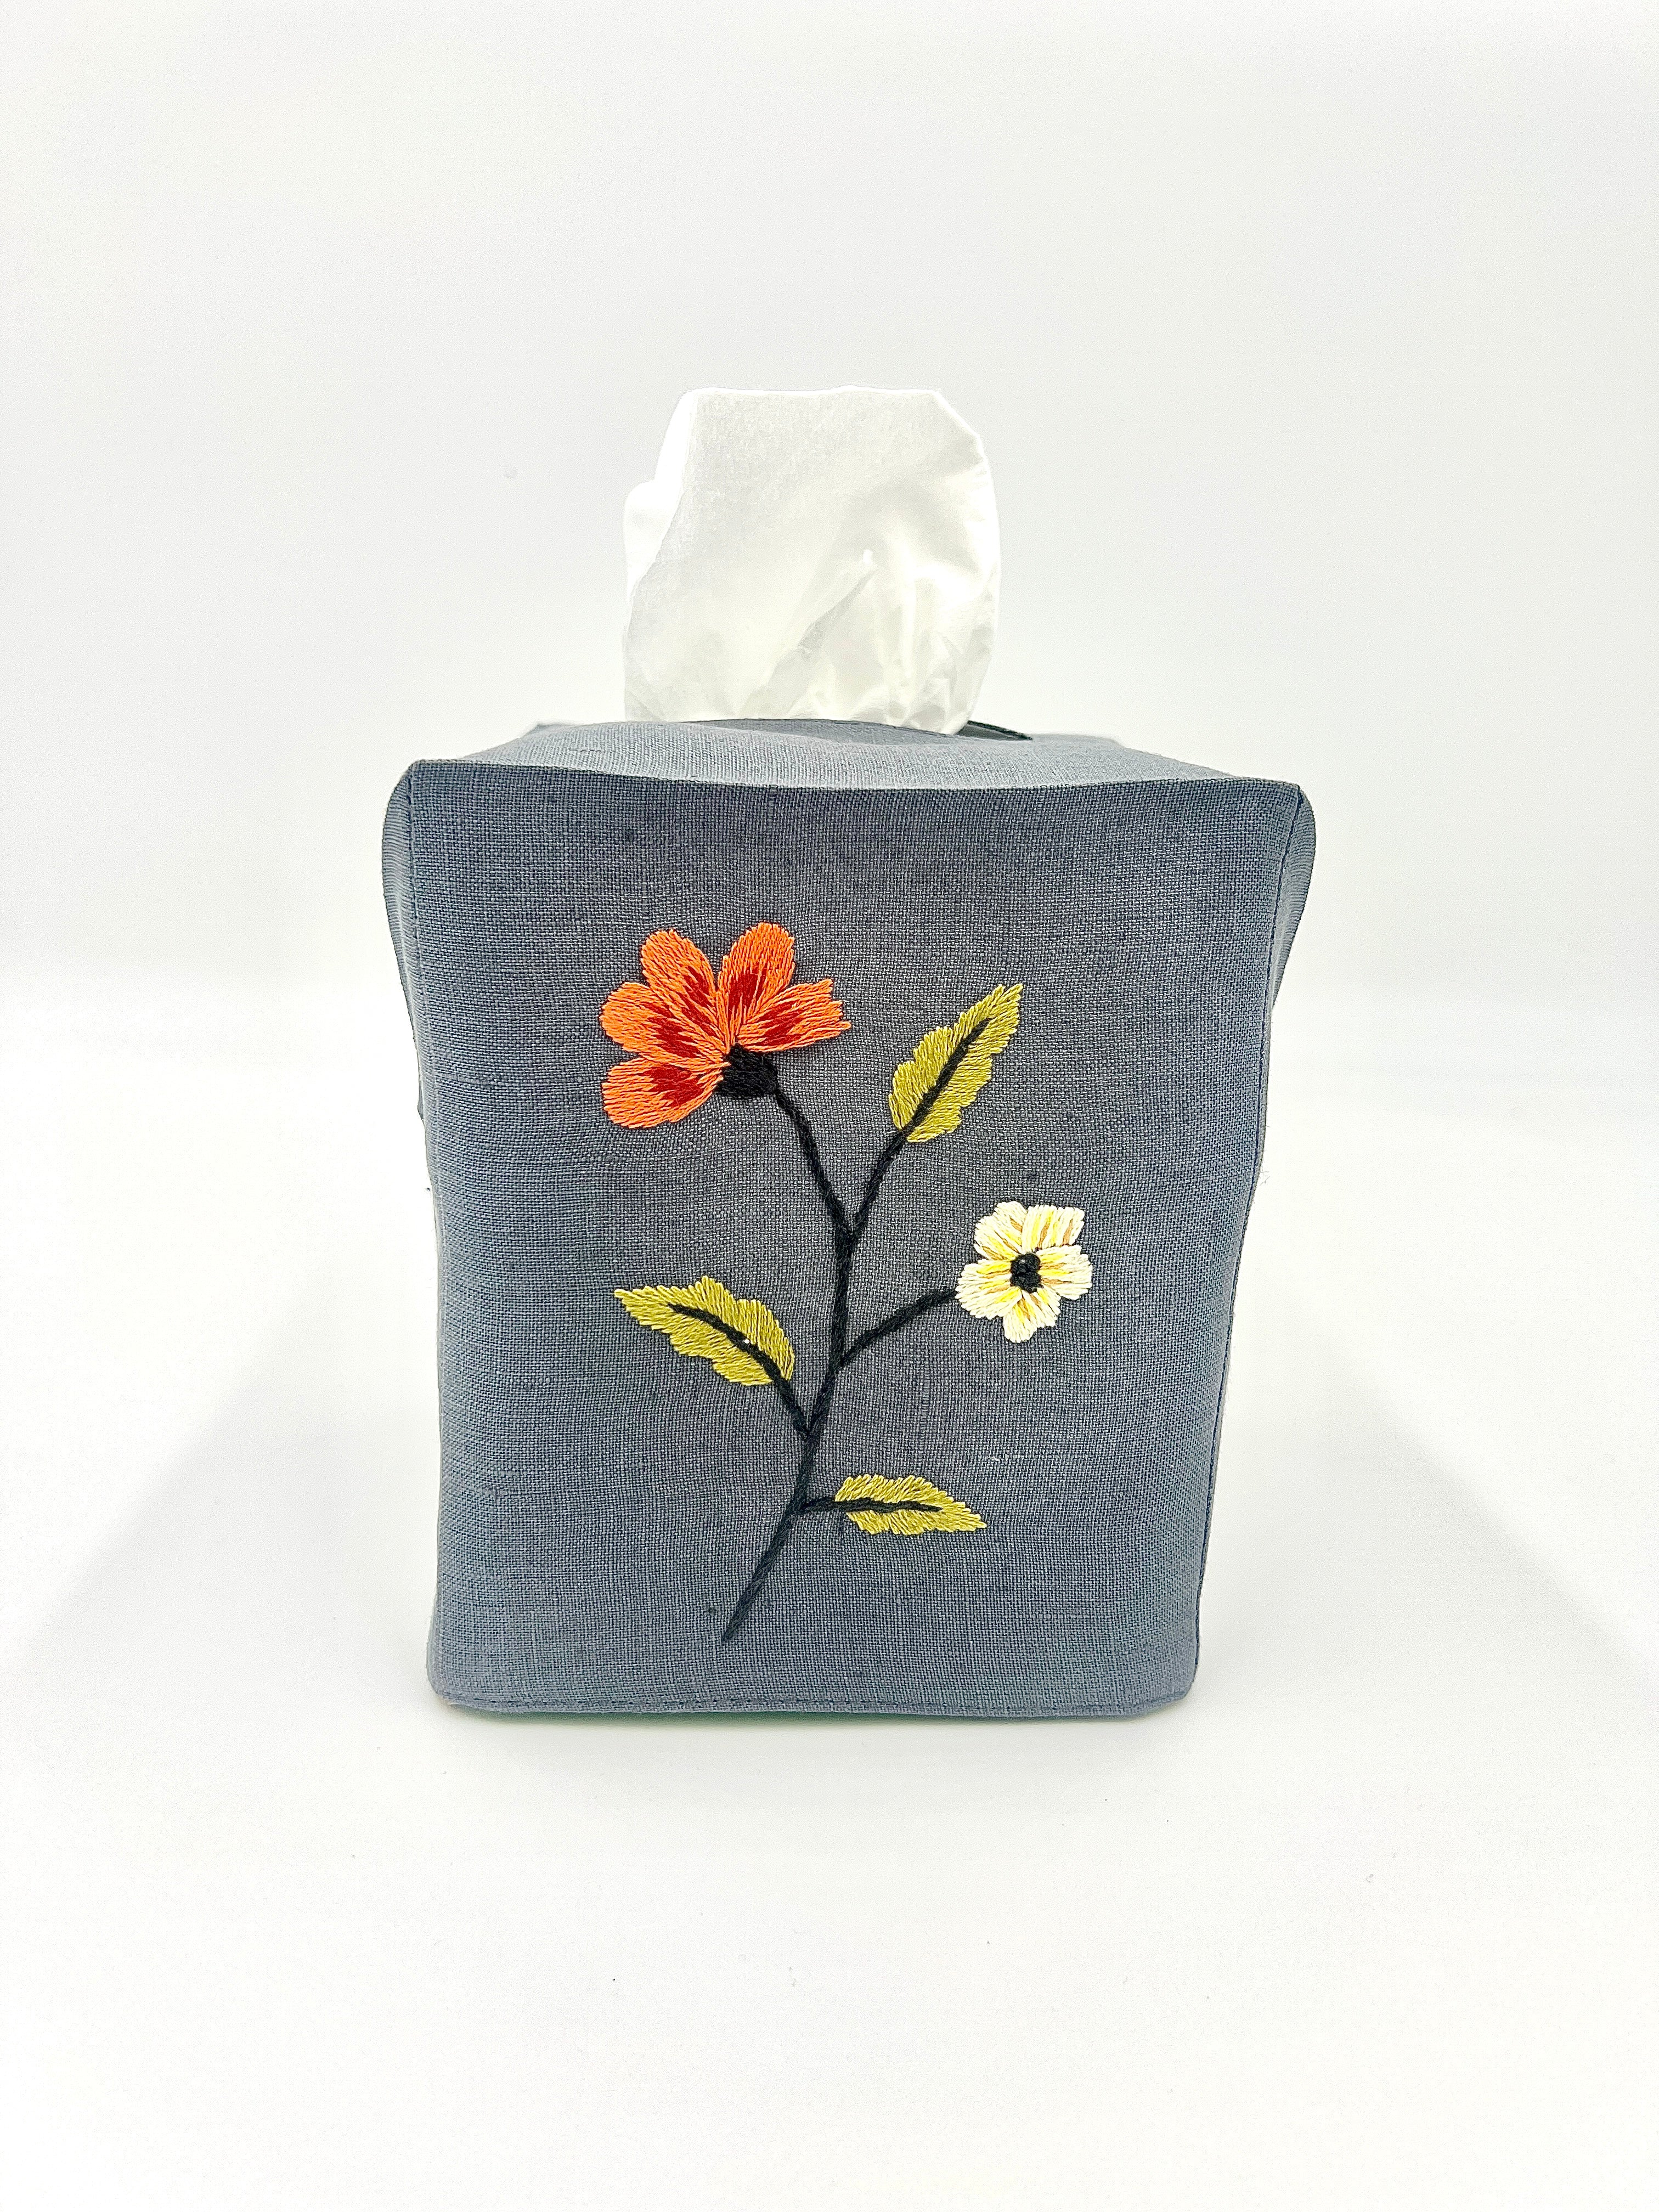 "Botanicals" Hand Embroidered Tissue Box Covers